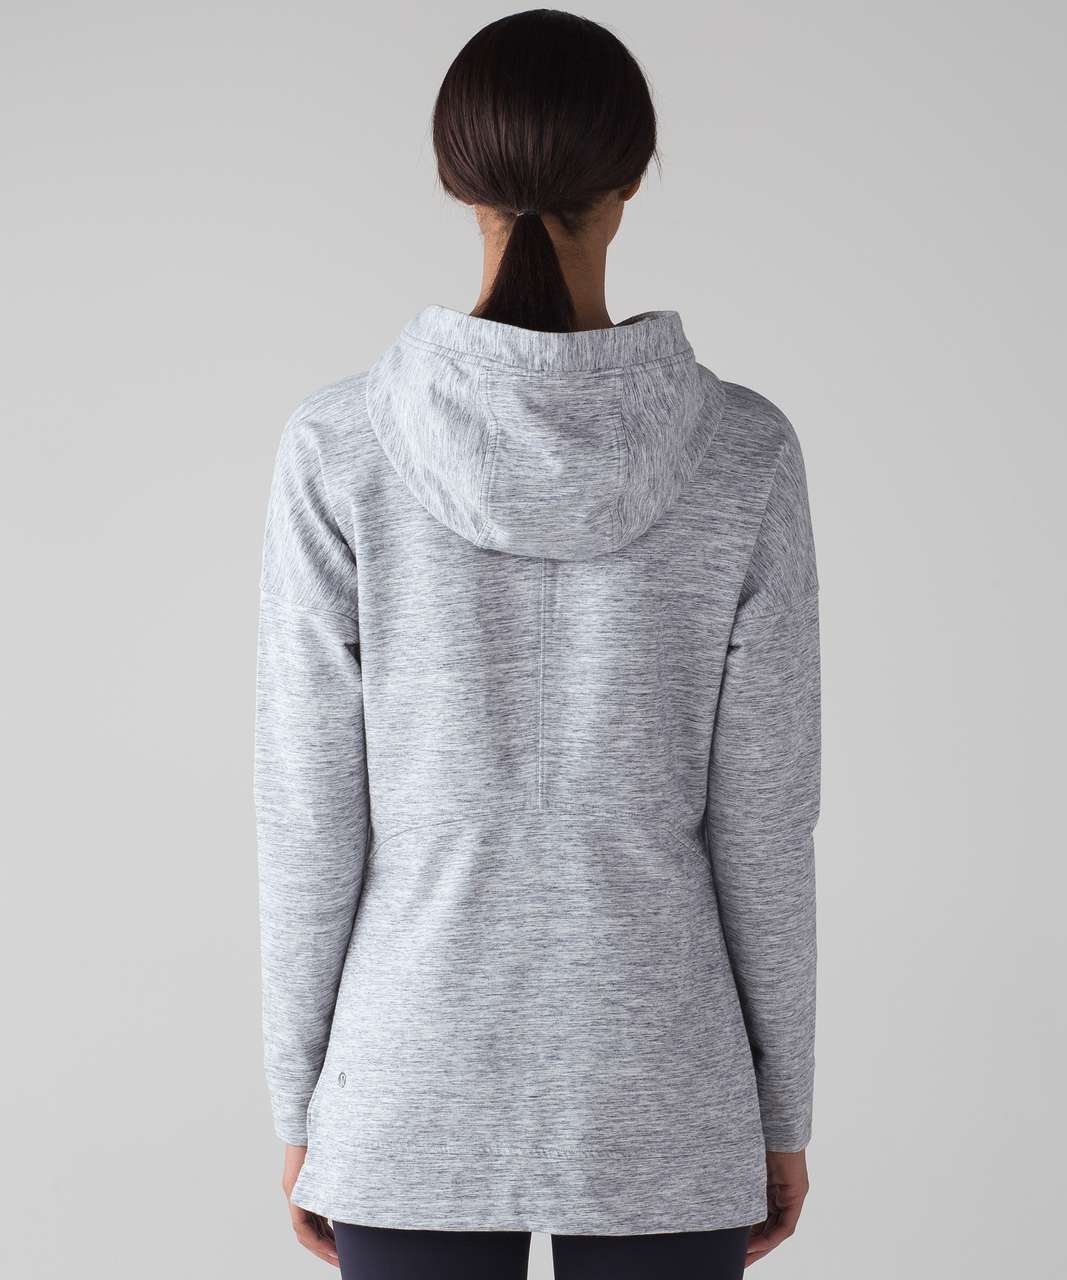 Lululemon Cut Above Hoodie - Heathered Space Dyed Gris